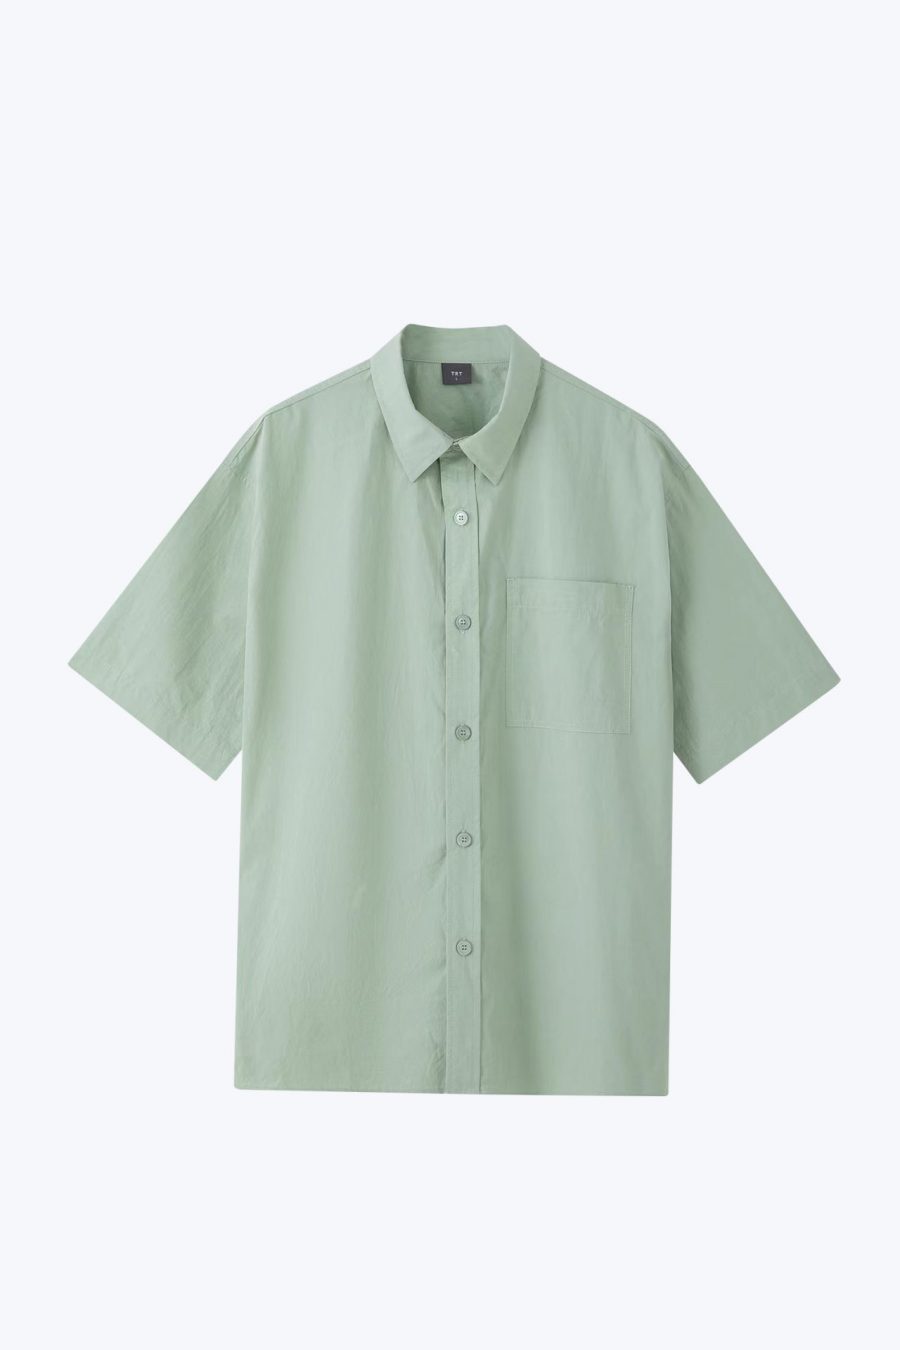 MB900105Y COTTON PATCH POCKET SHIRT APPLE GREEN